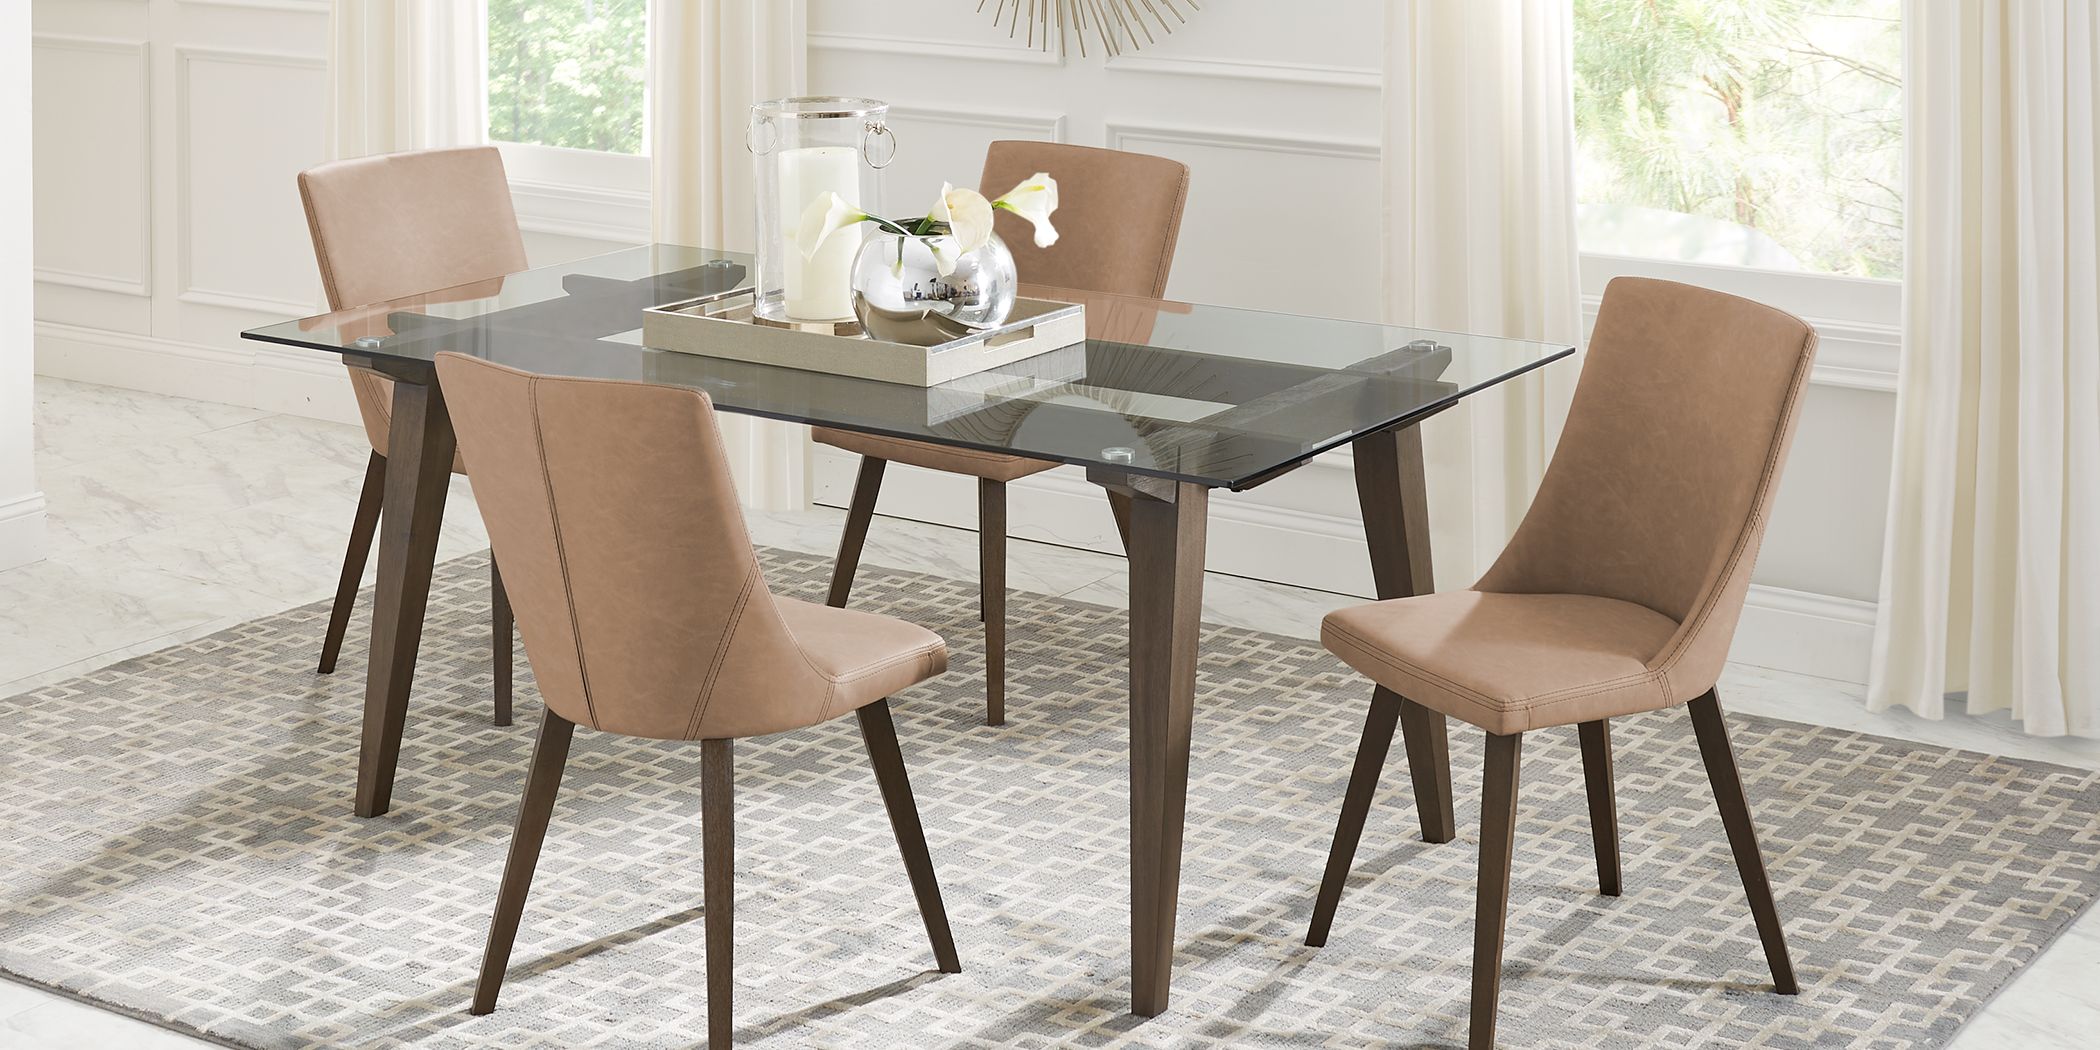 Lunetta Brown 5 Pc Dining Room with Dark Brown Chairs